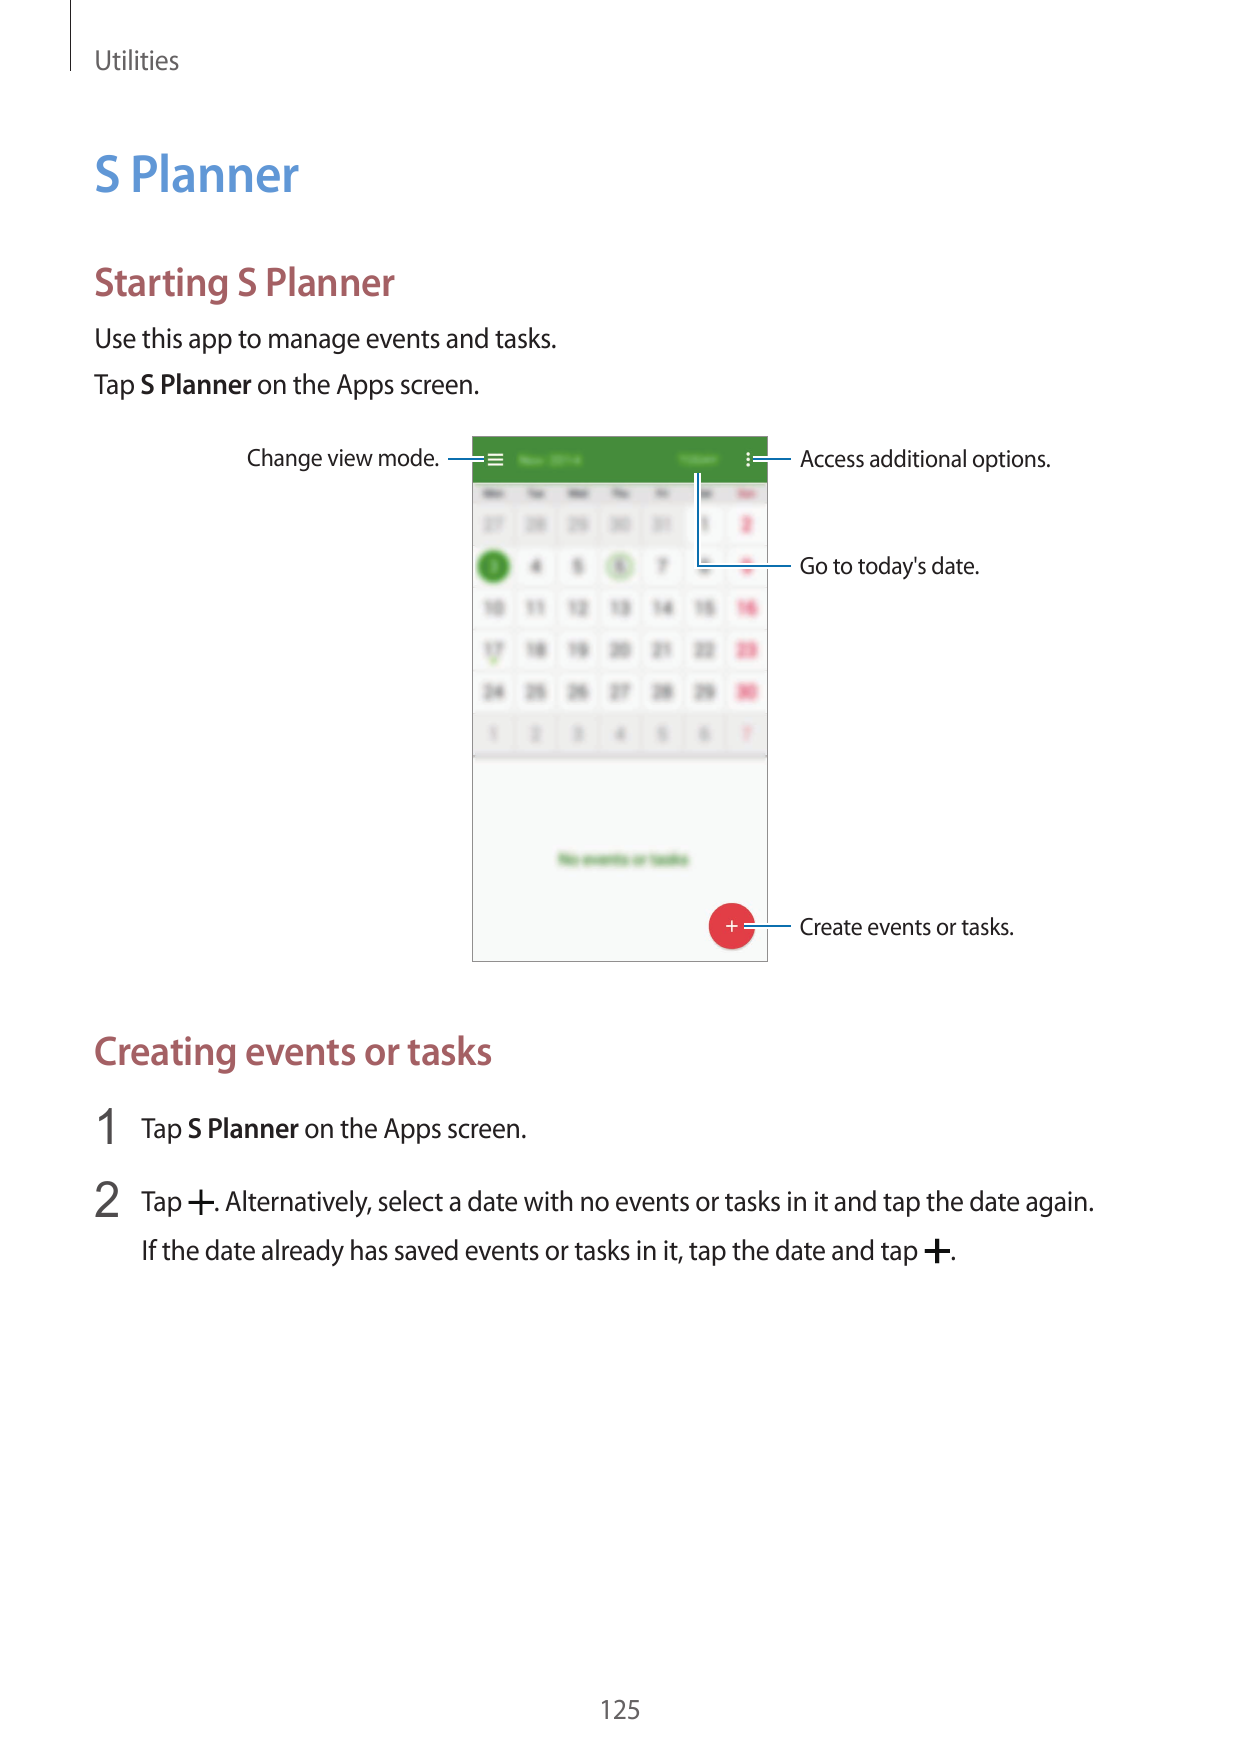 UtilitiesS PlannerStarting S PlannerUse this app to manage events and tasks.Tap S Planner on the Apps screen.Change view mode.Ac